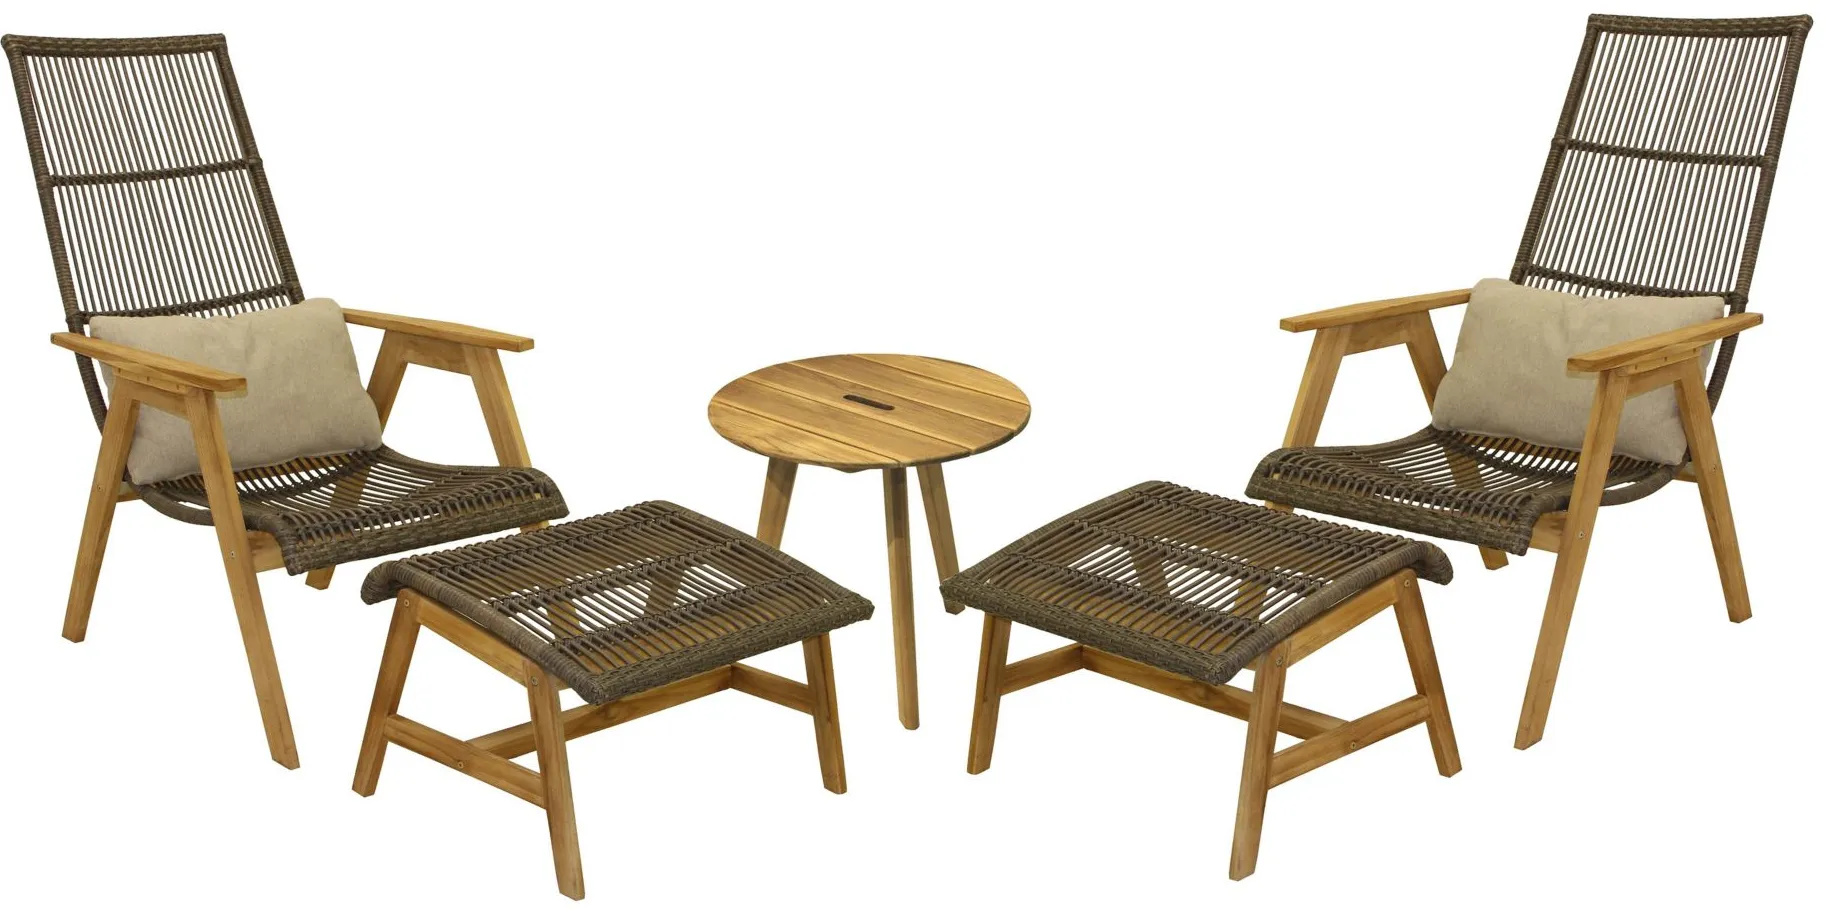 Bohemian 5-pc. Wicker and Teak Outdoor Lounge Set in Faye Ash by Outdoor Interiors